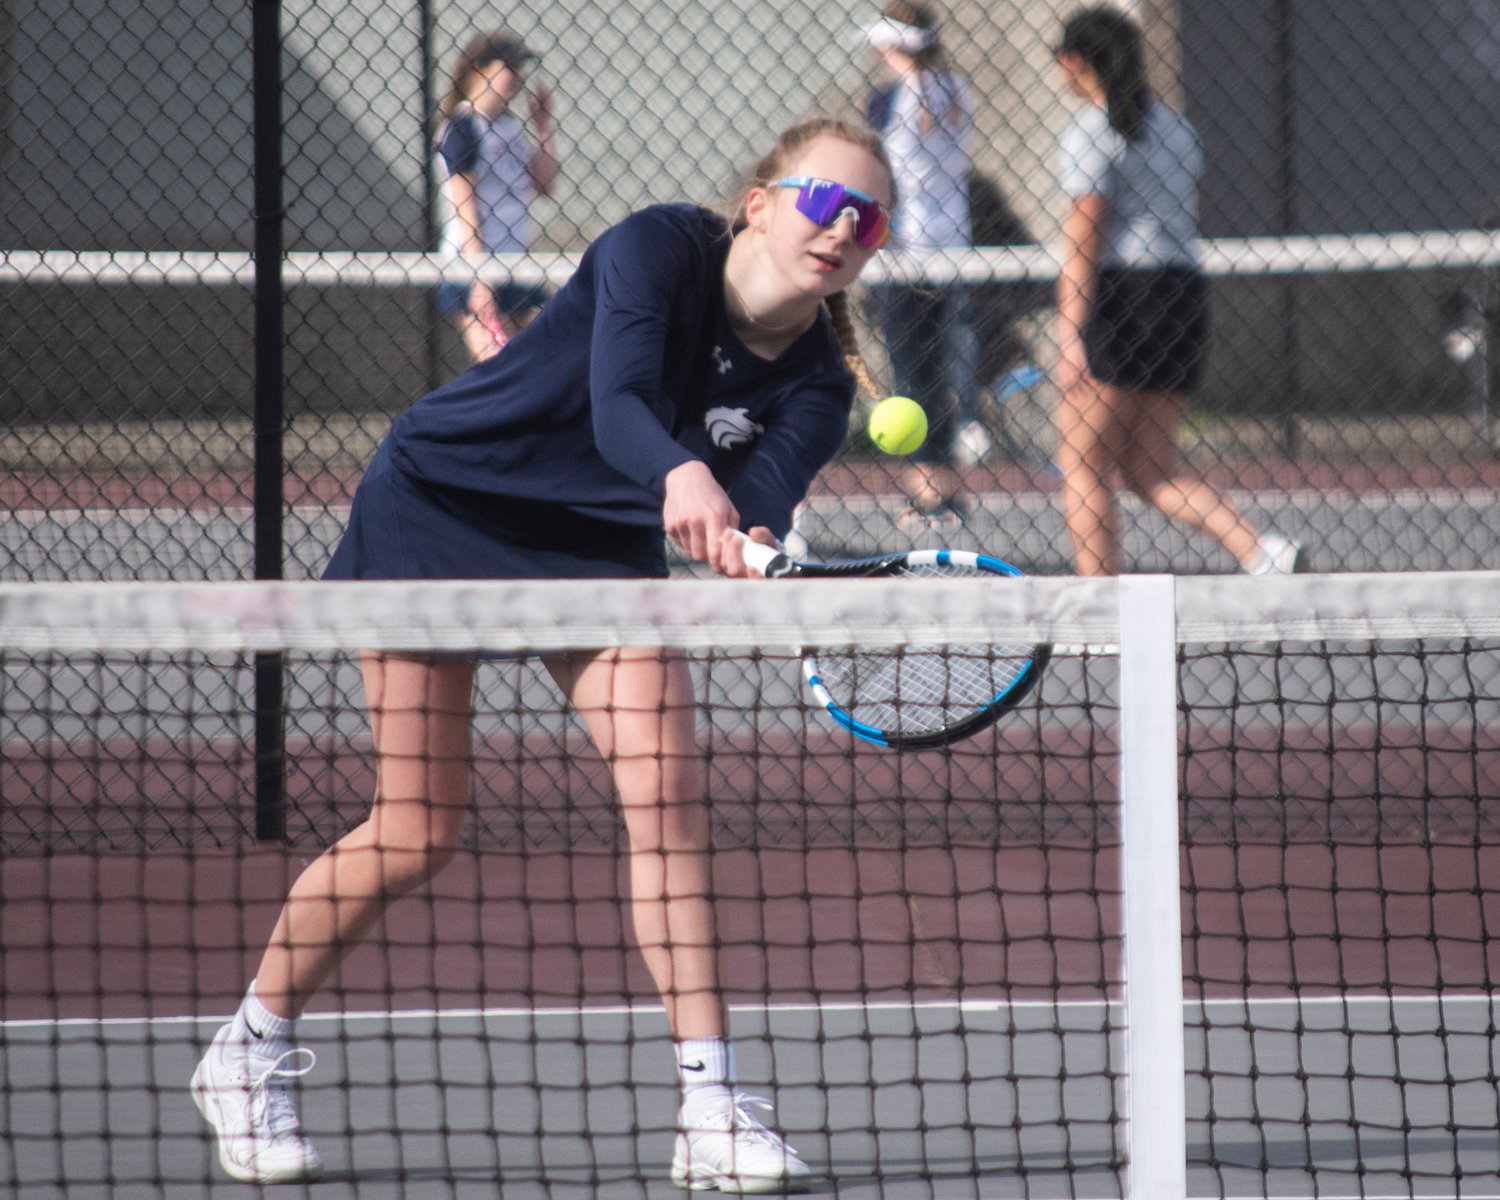 Black Hills’ second singles player Char Nieman hits a backhand during a match at W.F. West on Wednesday afternoon.